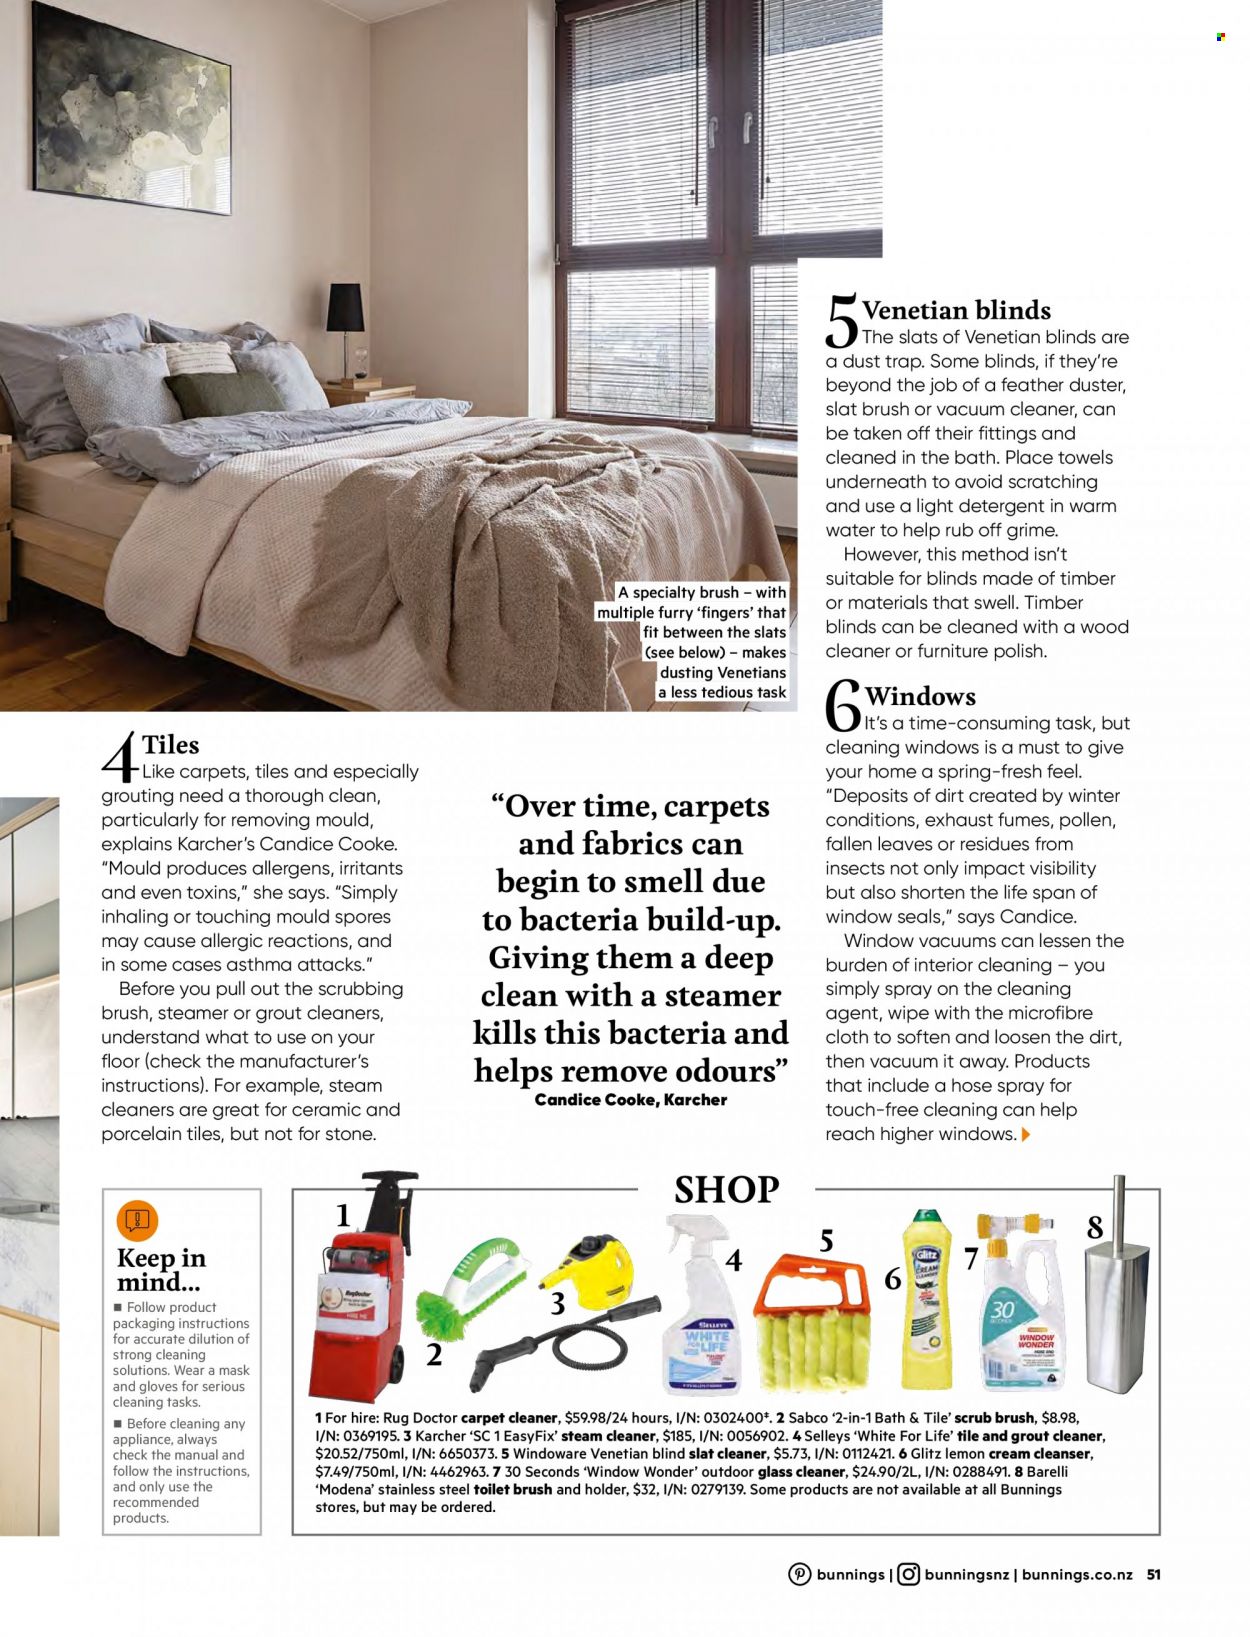 thumbnail - Bunnings Warehouse mailer - Sales products - detergent, glass cleaner, Sabco, holder, duster, towel, polish, furniture polish, rug, blinds, Kärcher. Page 51.